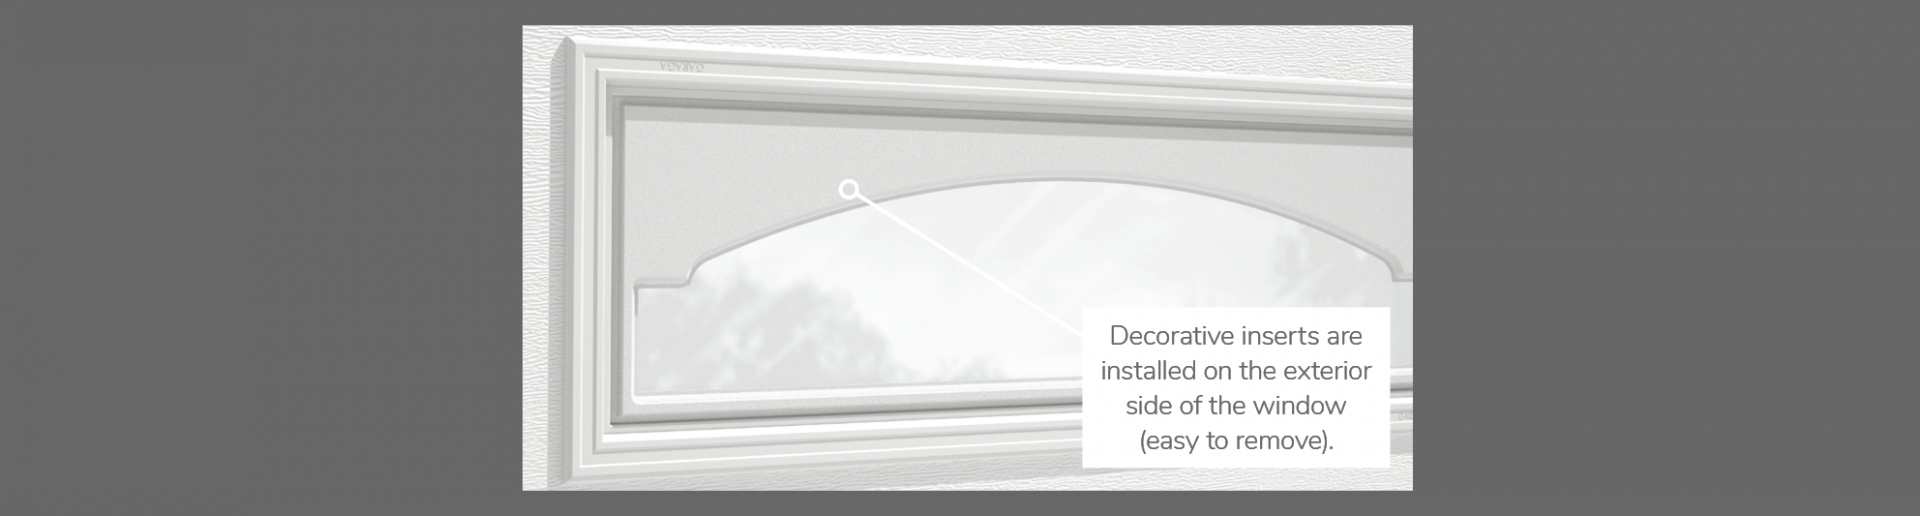 Cathedral Decorative Insert, 40" x 13", available for door R-16, R-12, 2 layers - Polystyrene and Non-insulated